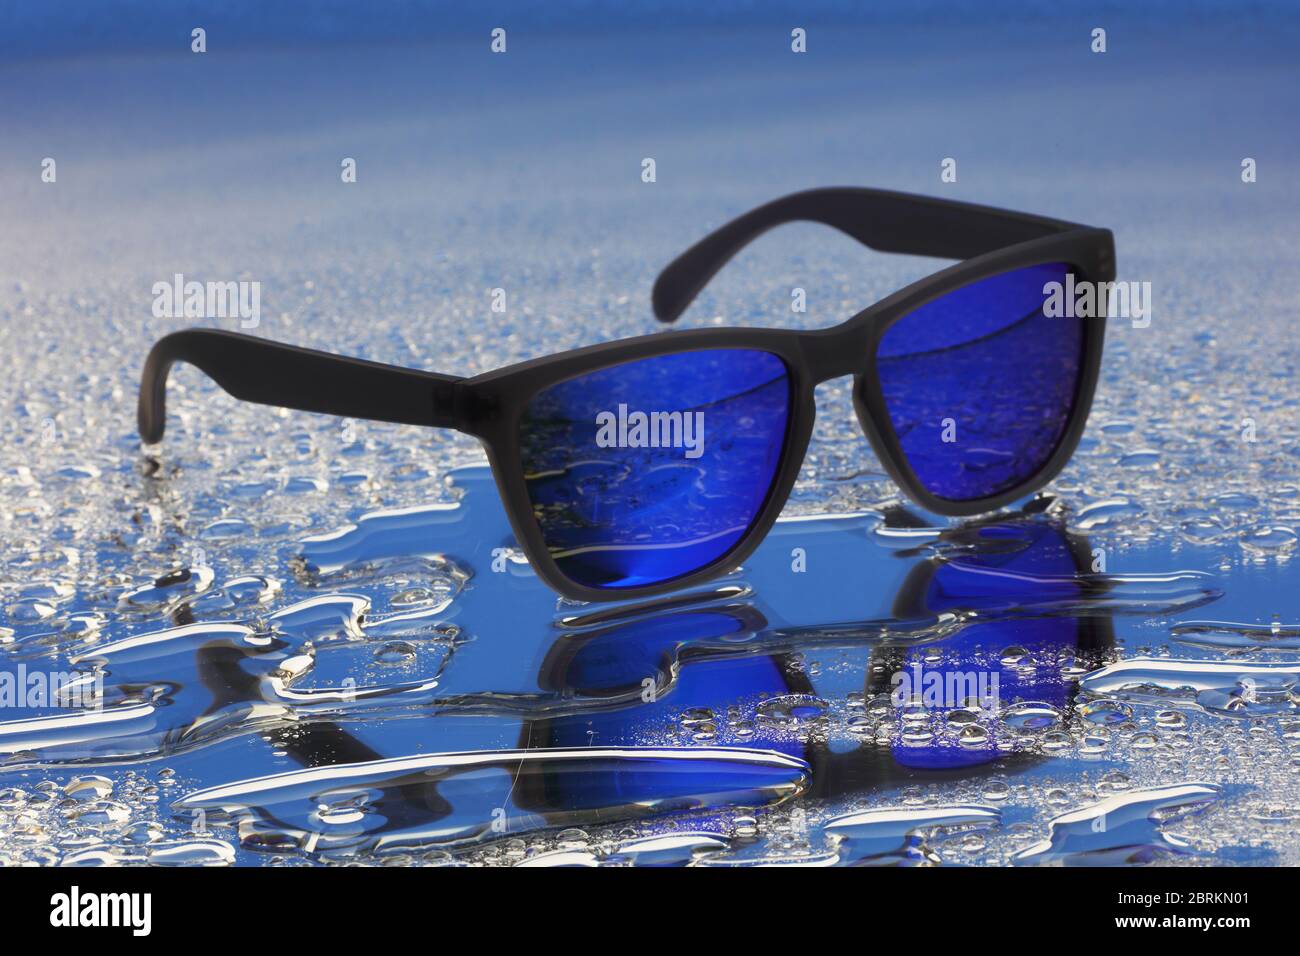 Blue sunglasses with black frames on water reflection with selective focus Stock Photo